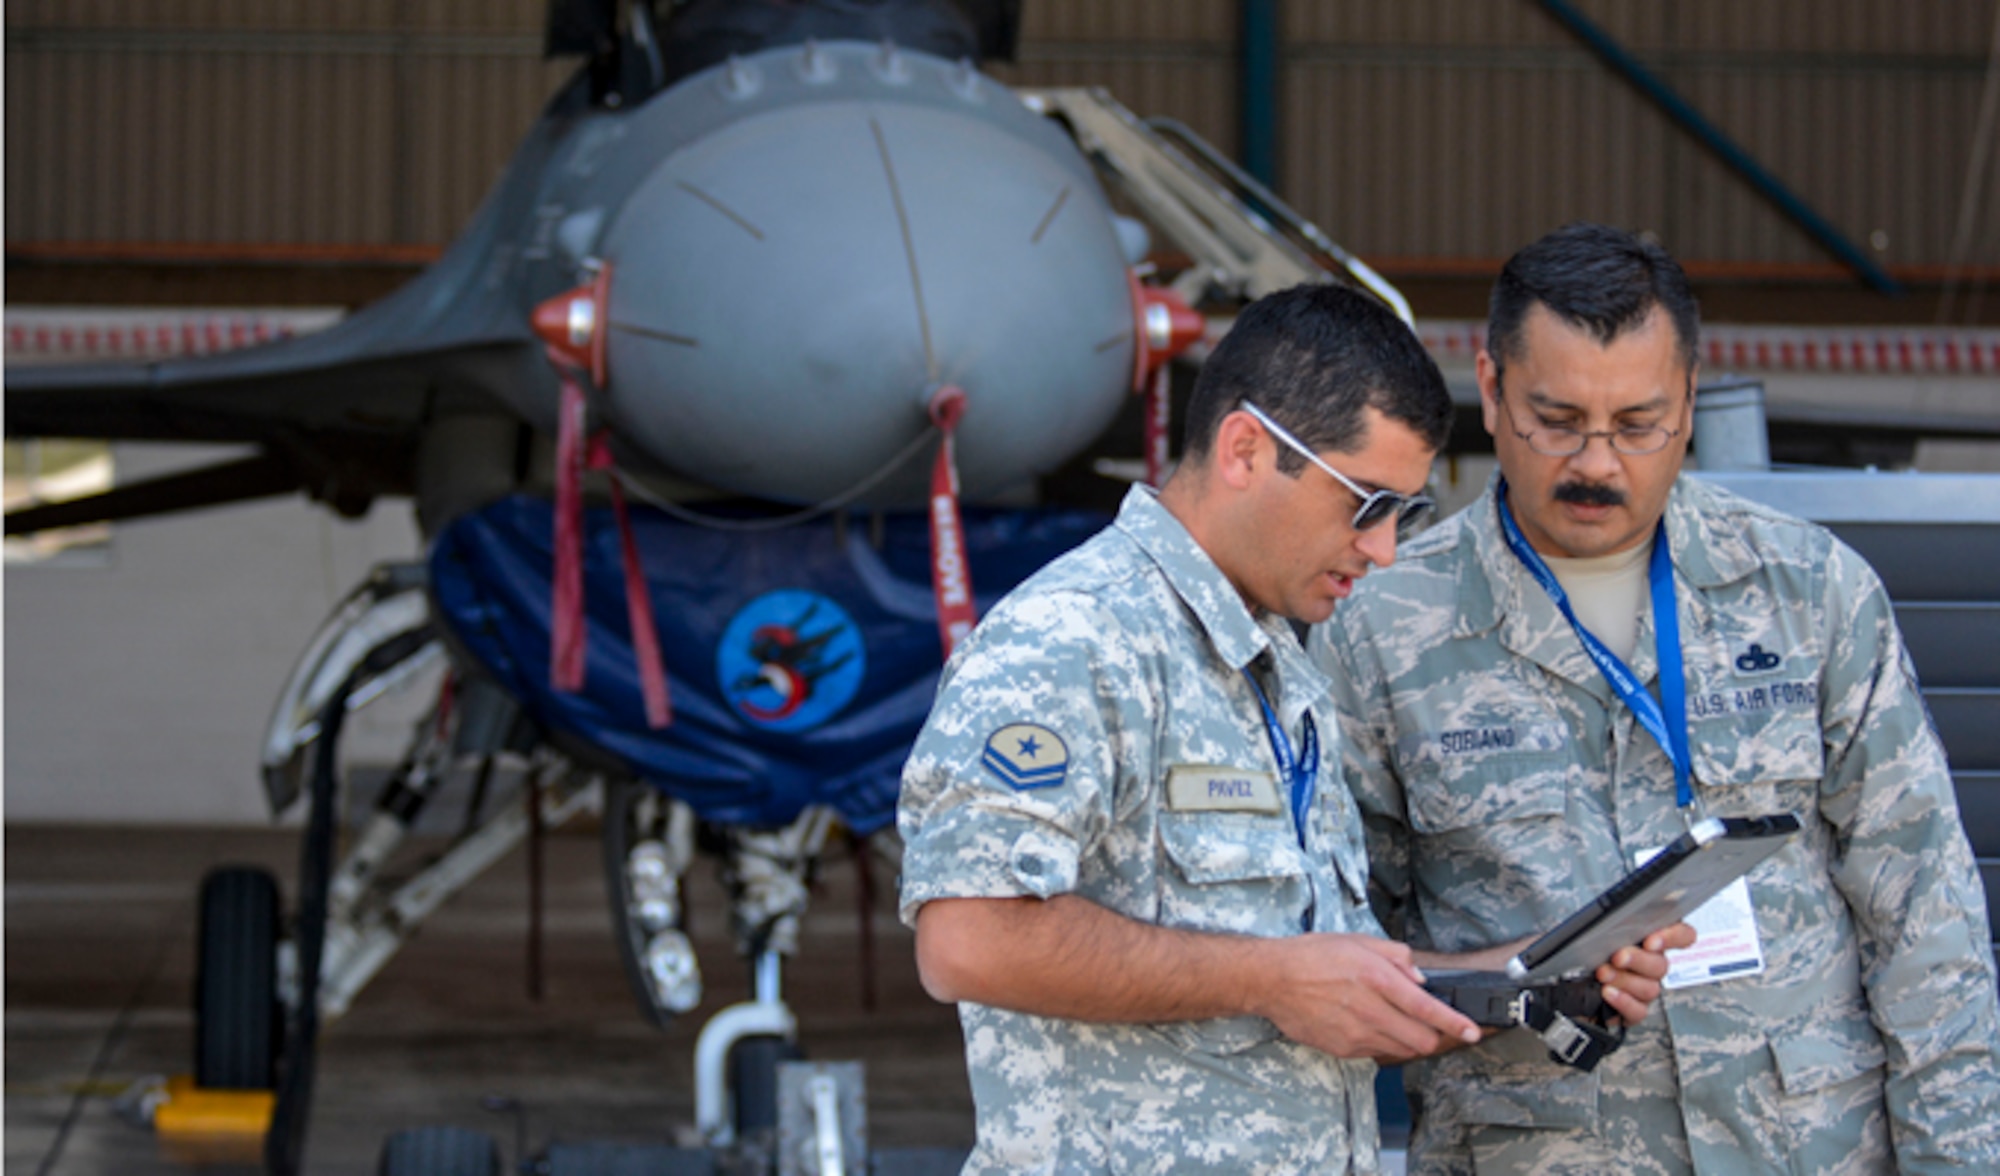 Master Sgt. Pedro Soriano talks with a counterpart from the Chilean air force about working with the F-16 Fighting Falcon during the first day of the FIDAE Air Show, March 25, 2014, in Santiago, Chile. Nearly 60 Airmen are participating in subject matter expert exchanges with Chilean air force counterparts during FIDAE,  sharing best practices and procedures to build partnerships and promote interoperability with partner-nations throughout South America, Central America and the Caribbean. Soriano is an F-16 maintenance specialist from the Texas Air National Guard. (U.S. Air Force photo/Capt. Justin Brockhoff)